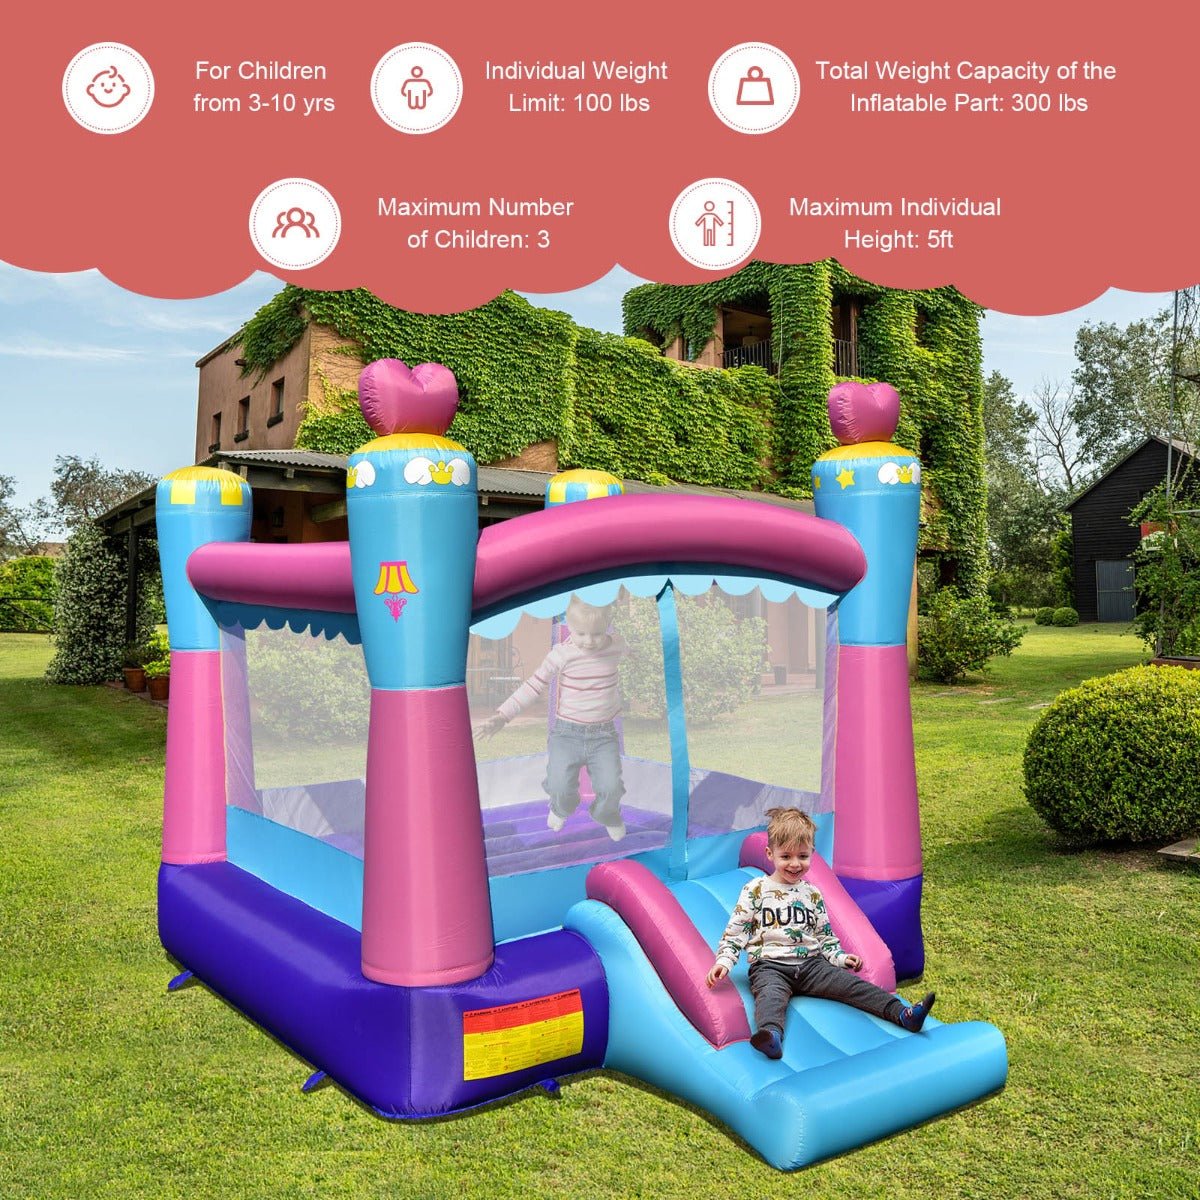 Princess Castle Inflatable Bouncer - Joyful Jumping Experience for Children